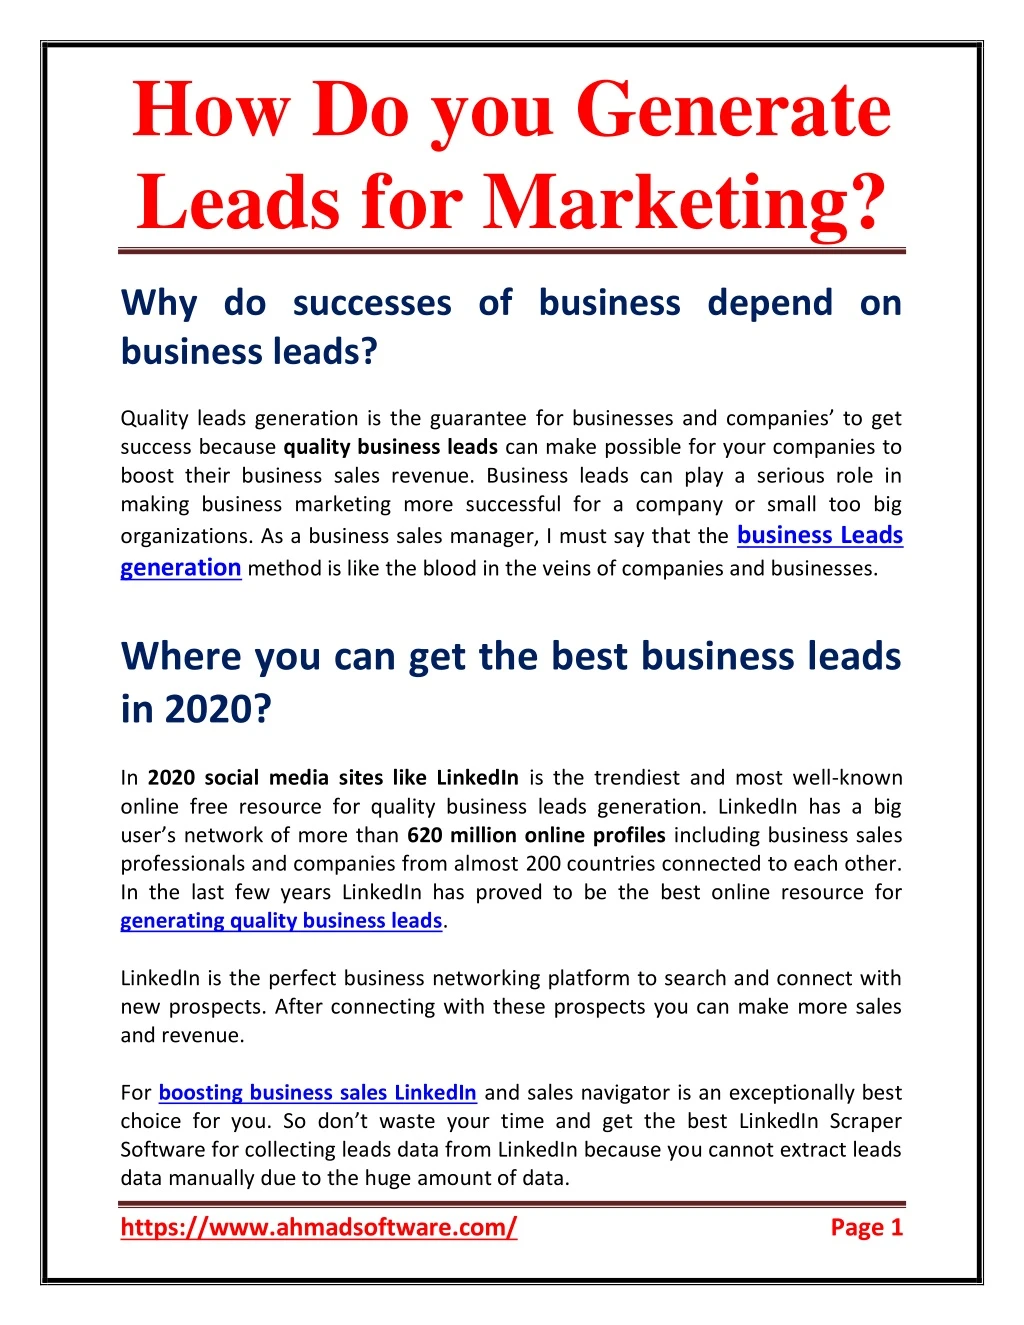 how do you generate leads for marketing